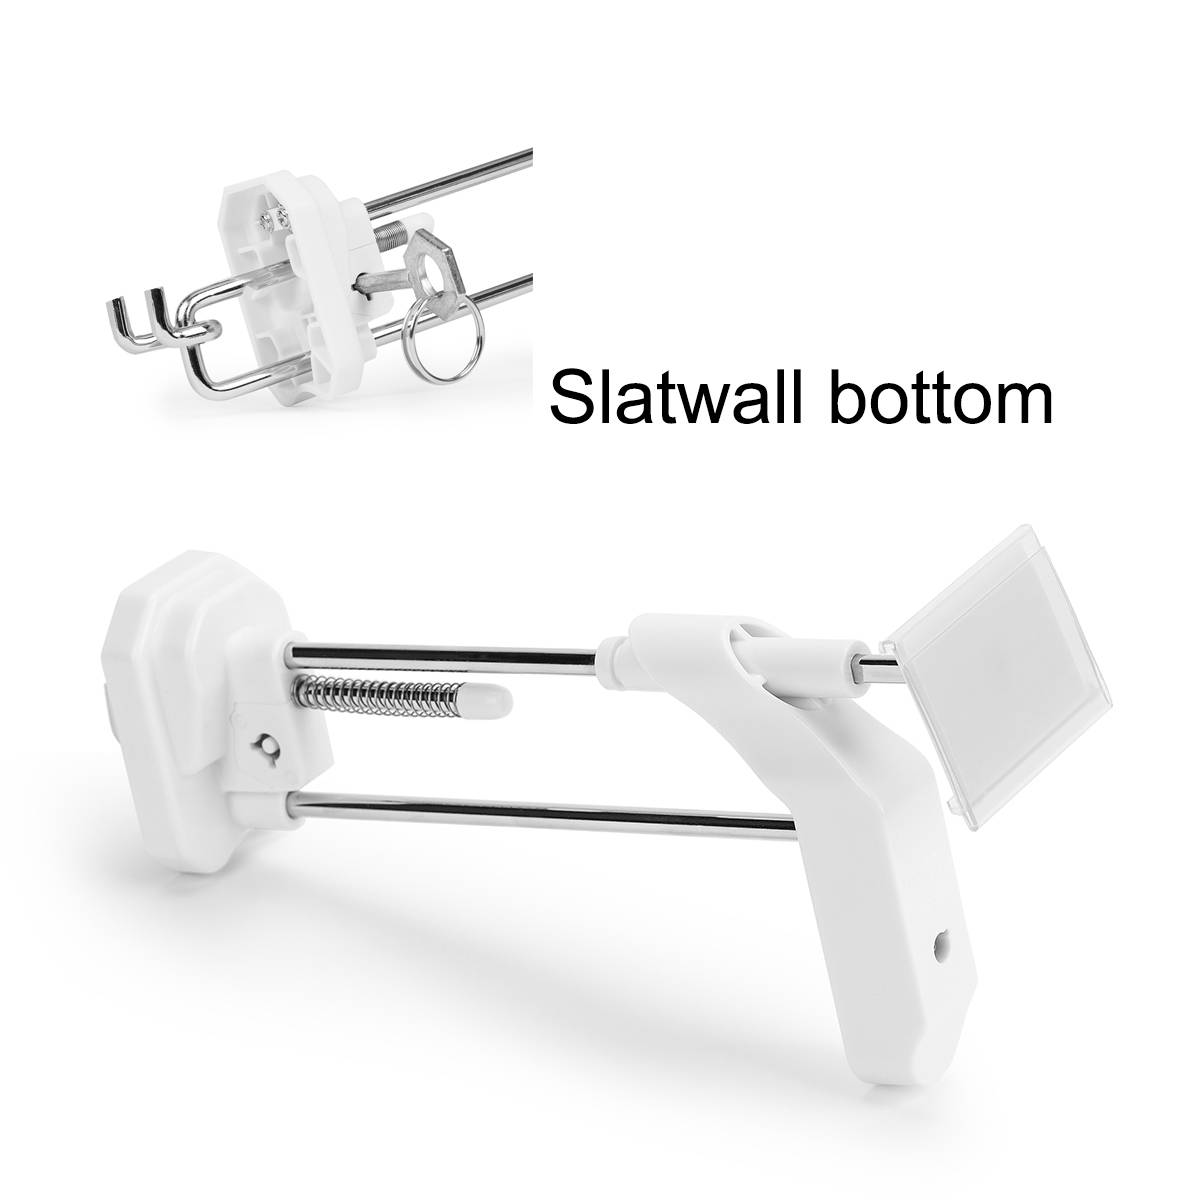 Patent Security hook with slatwall bottom Featured Image